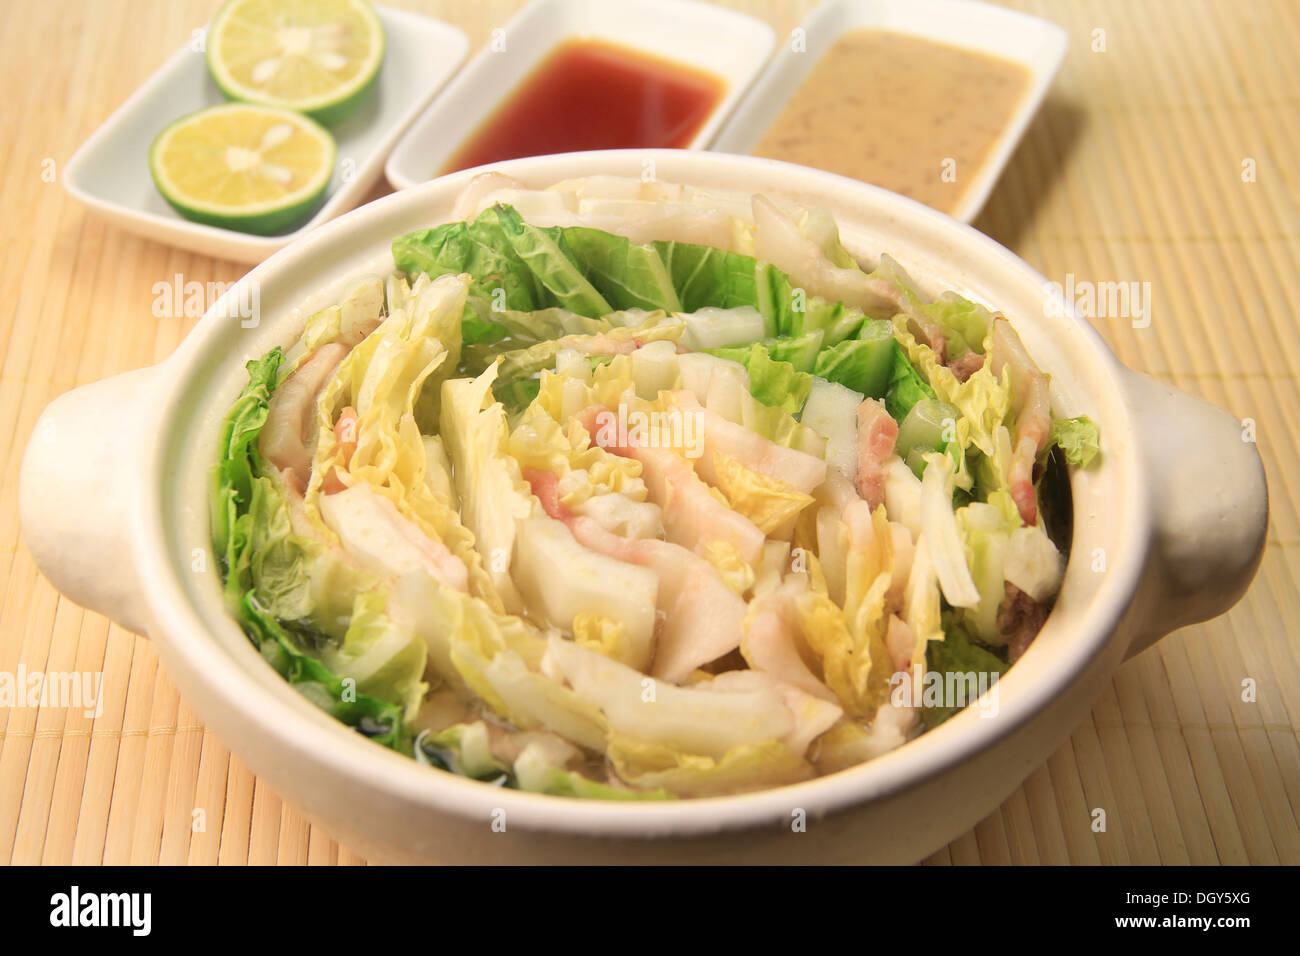 Pot of Chinese cabbage and pork belly Stock Photo